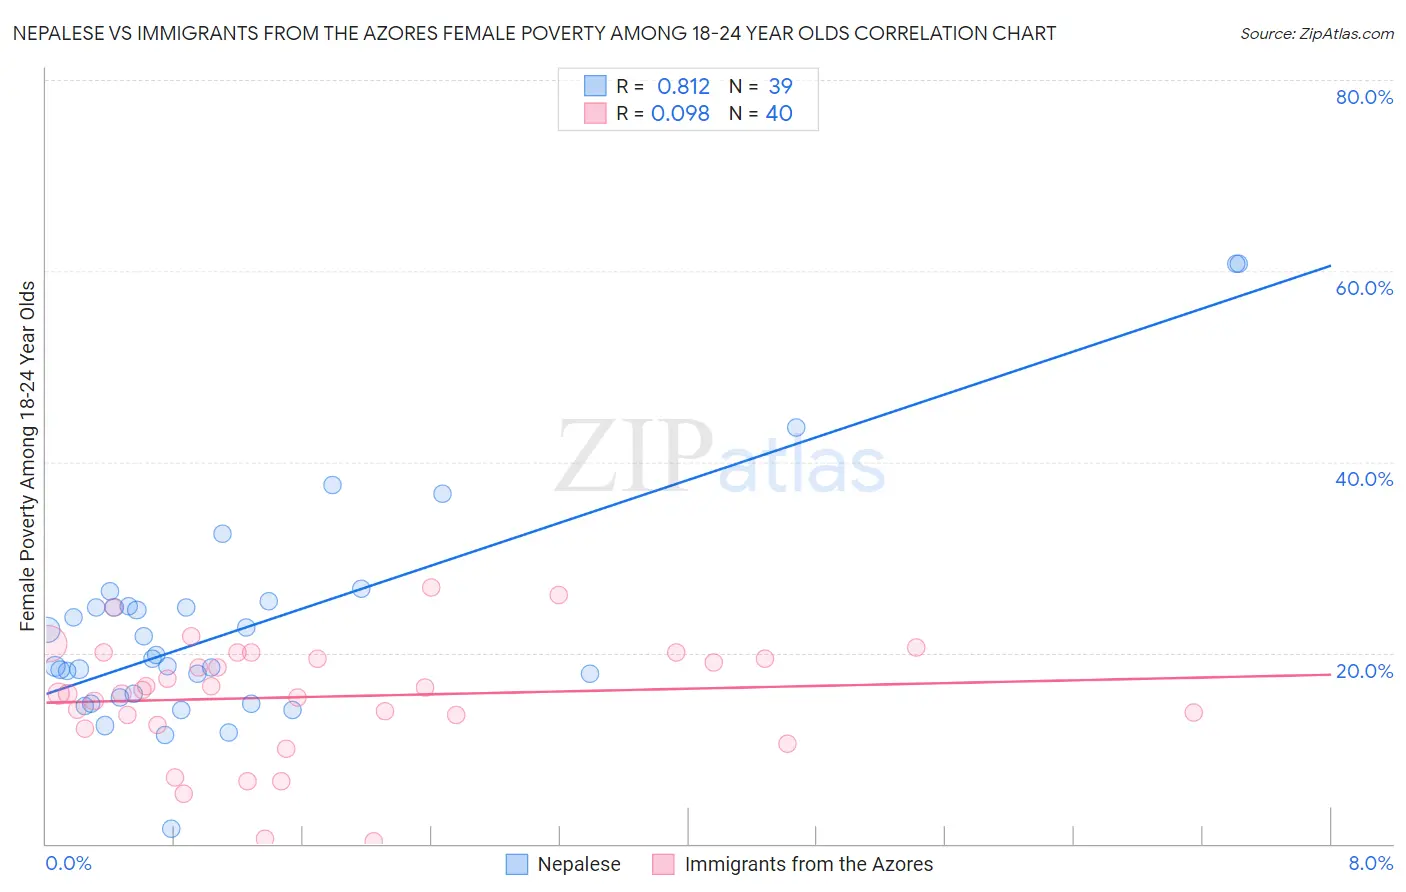 Nepalese vs Immigrants from the Azores Female Poverty Among 18-24 Year Olds